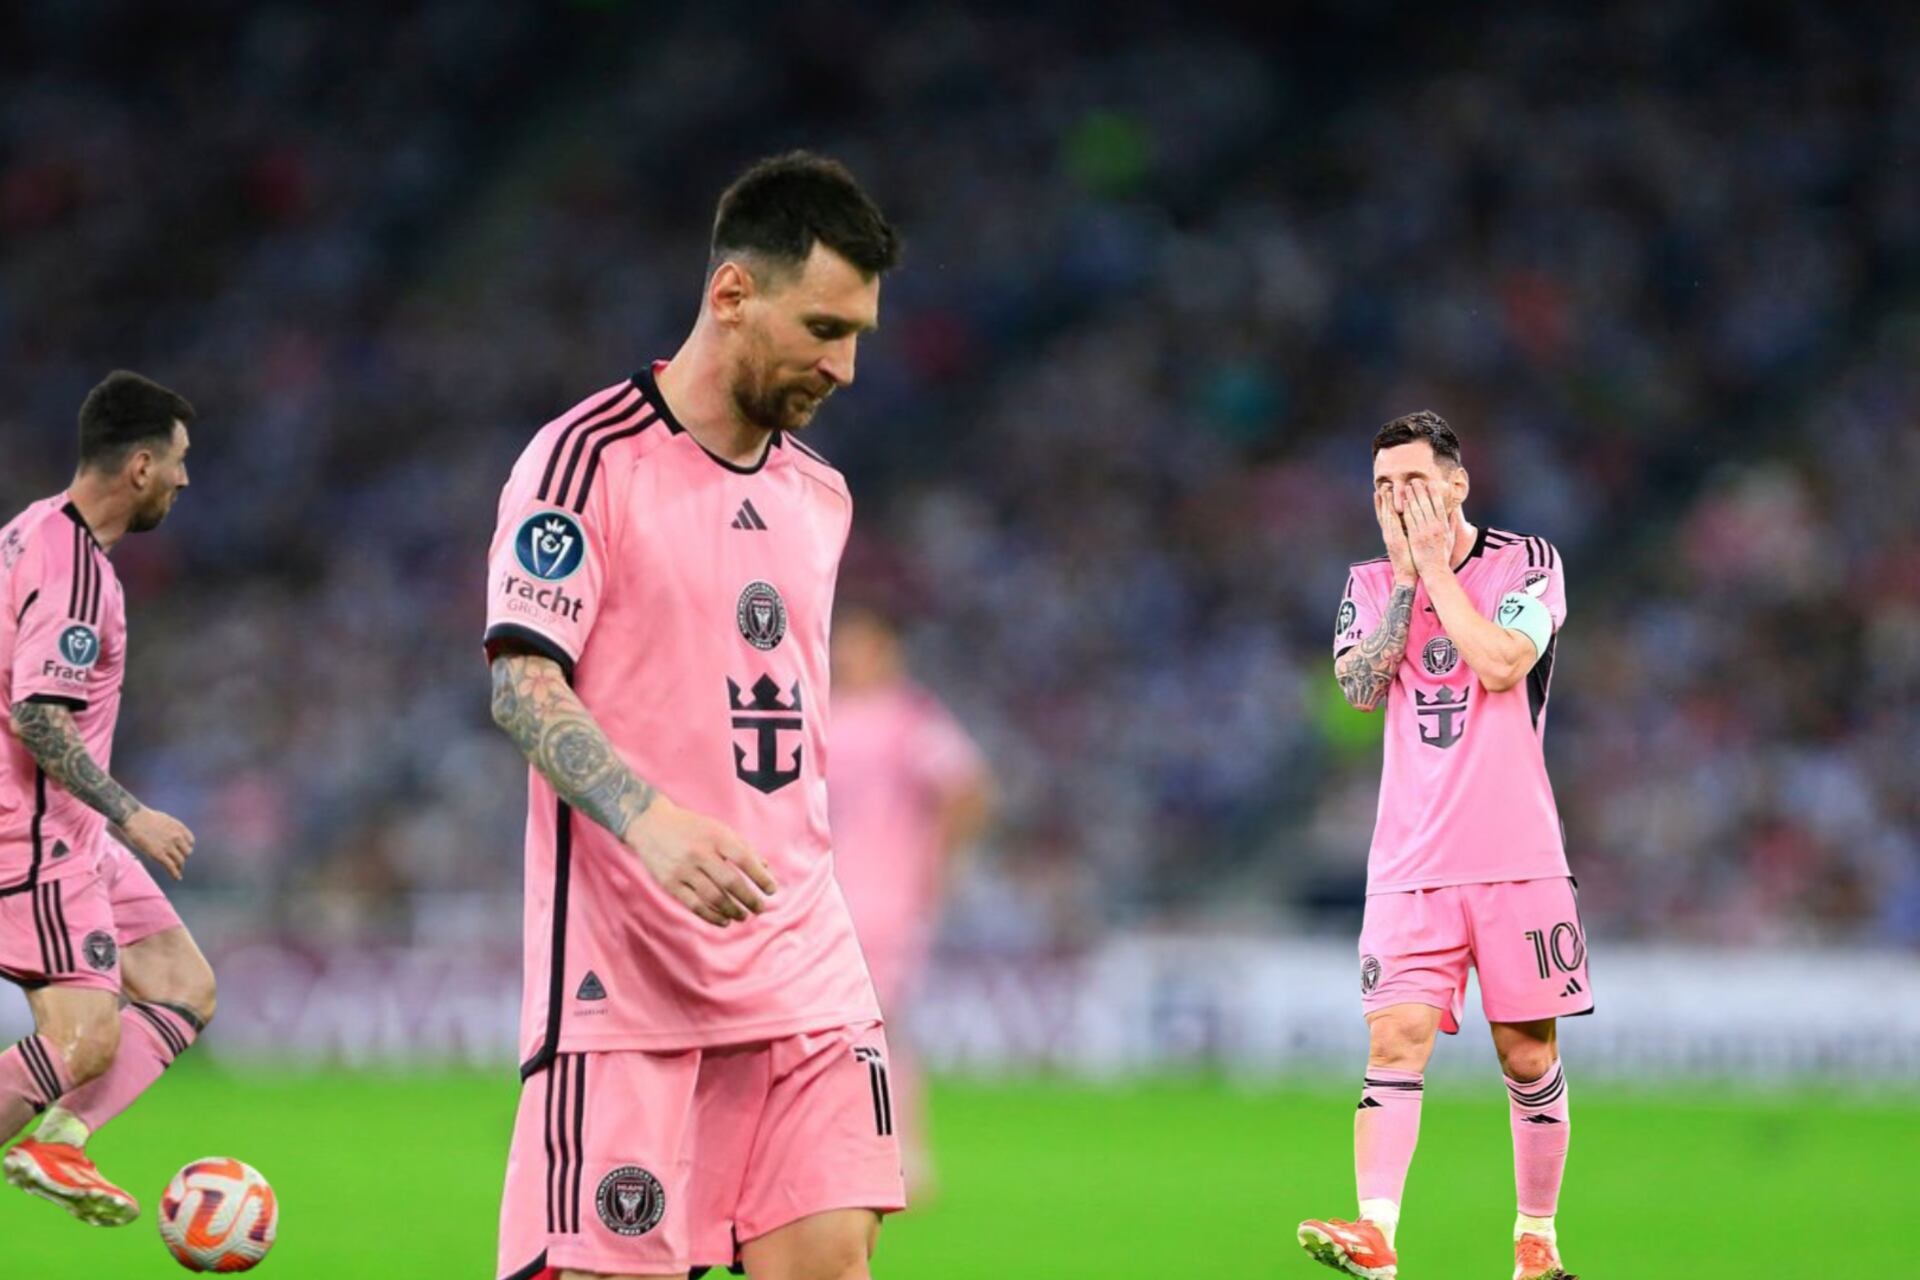 (VIDEO) Messi times comes to an end? The worst free kick that Messi has attempted was seen in Mexico